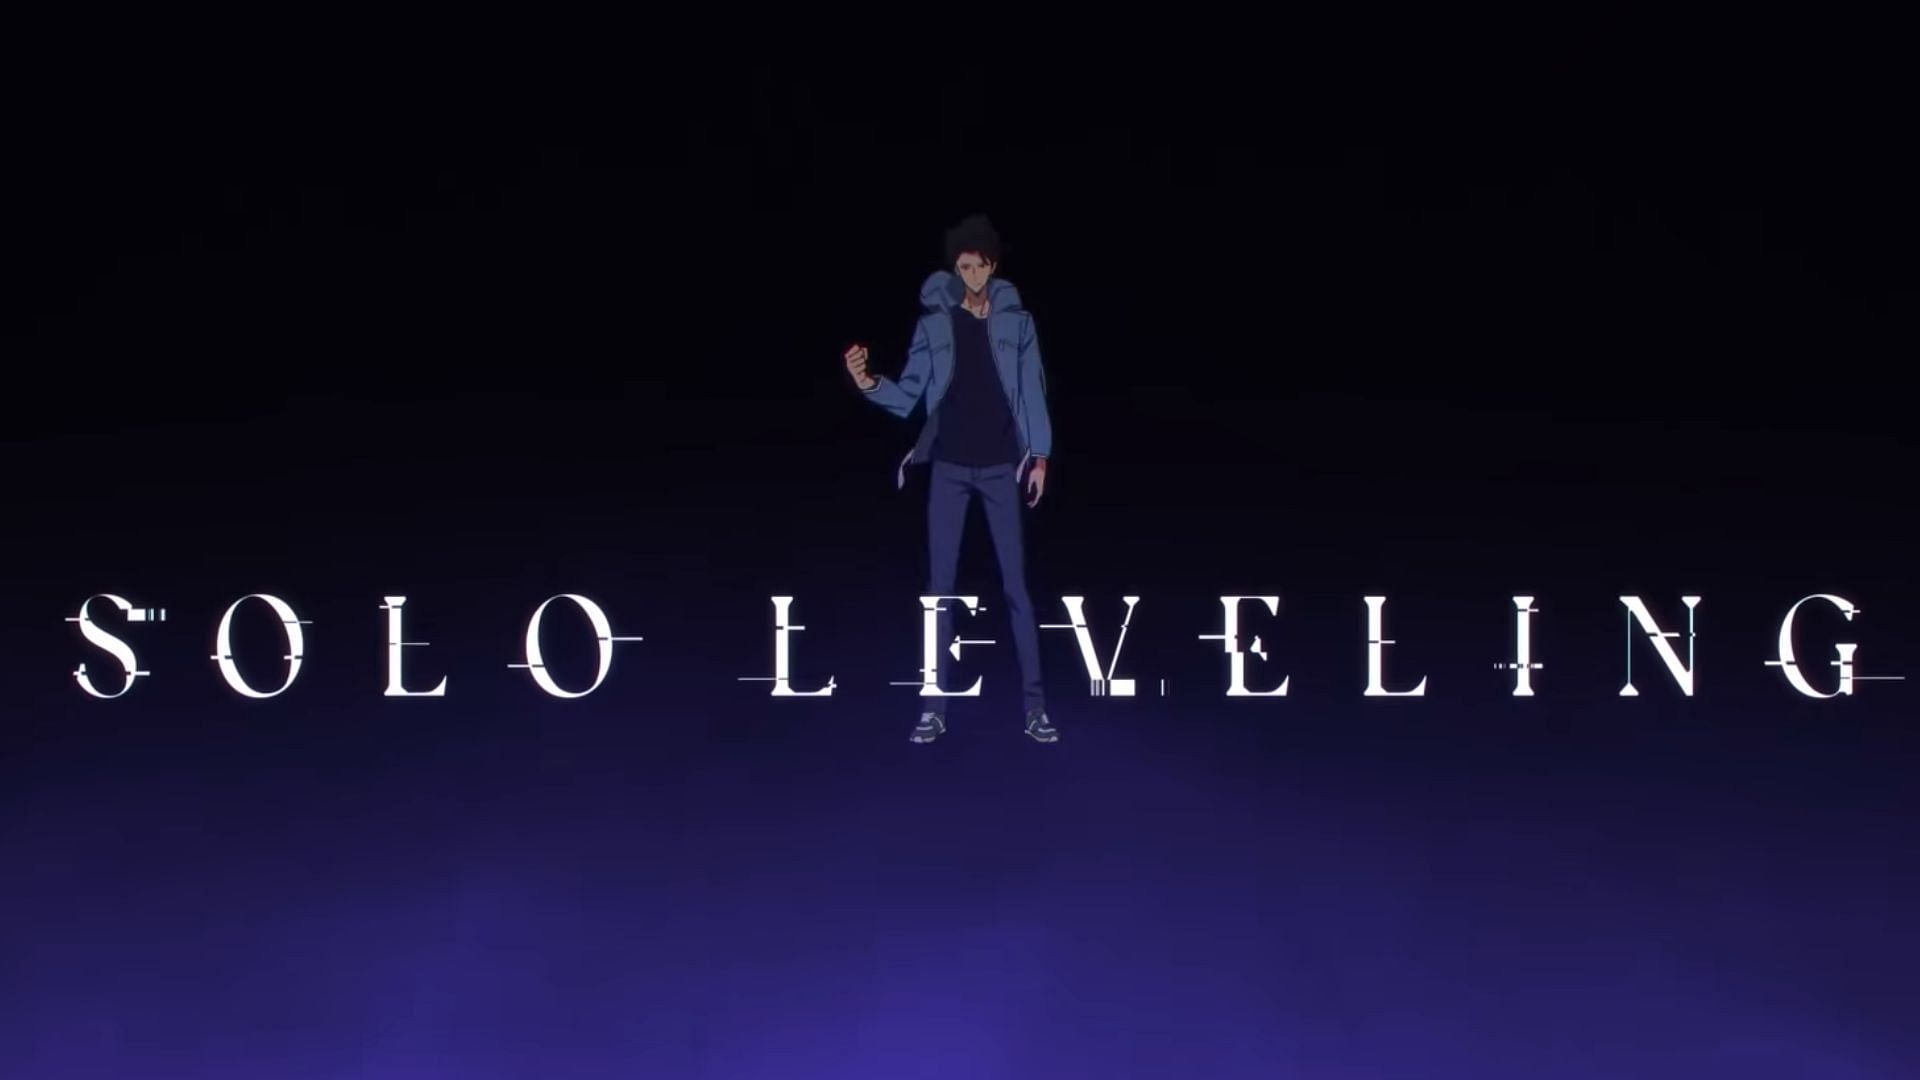 Solo leveling 1 a 5 sur Manga occasion